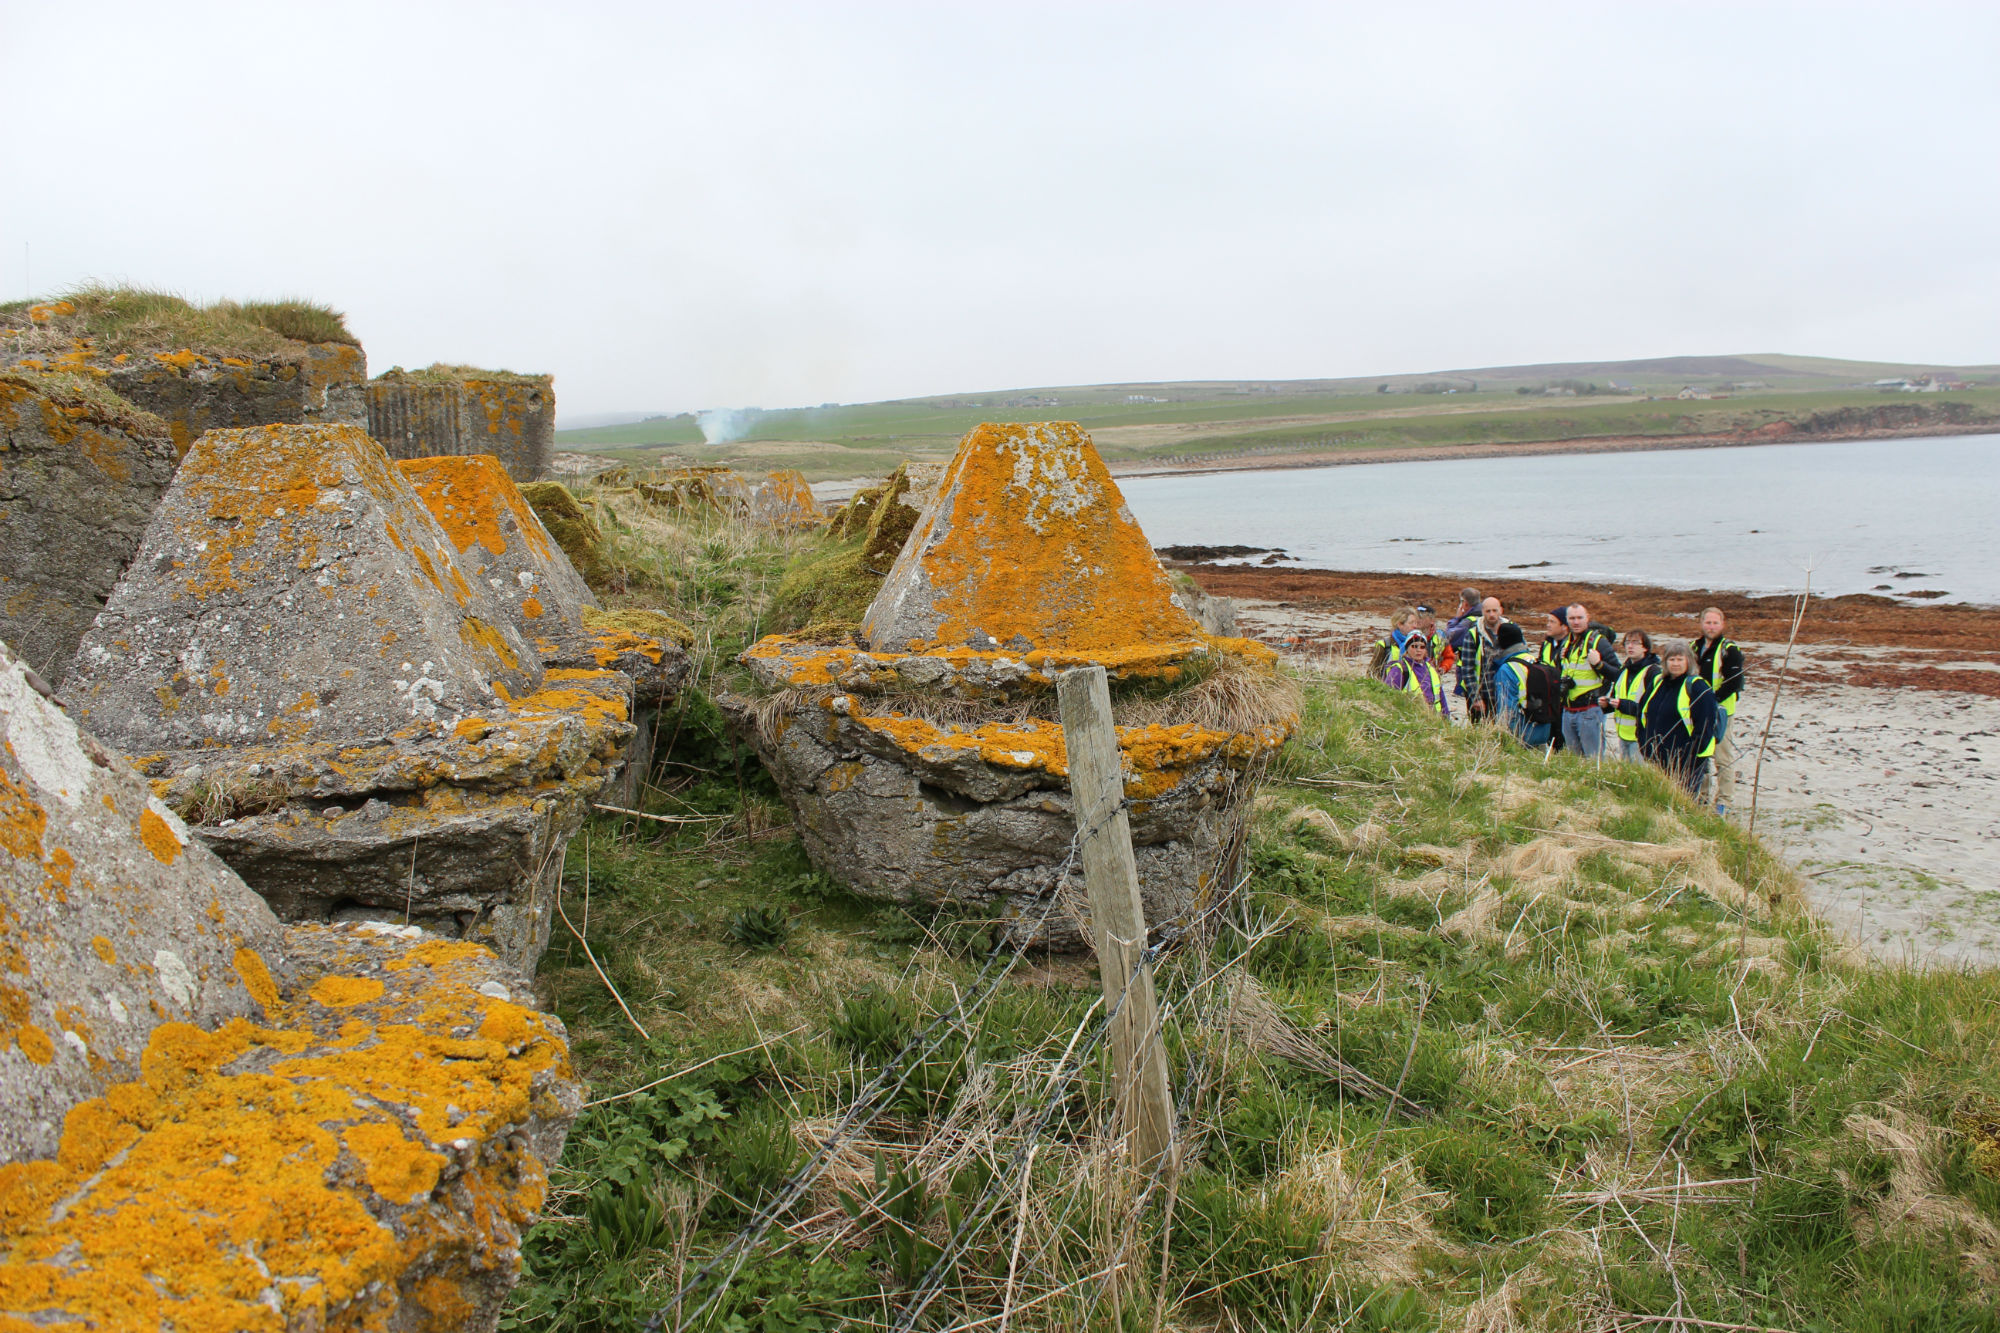 Anti-tank defences undermined by erosion at coast edge with foundations exposed